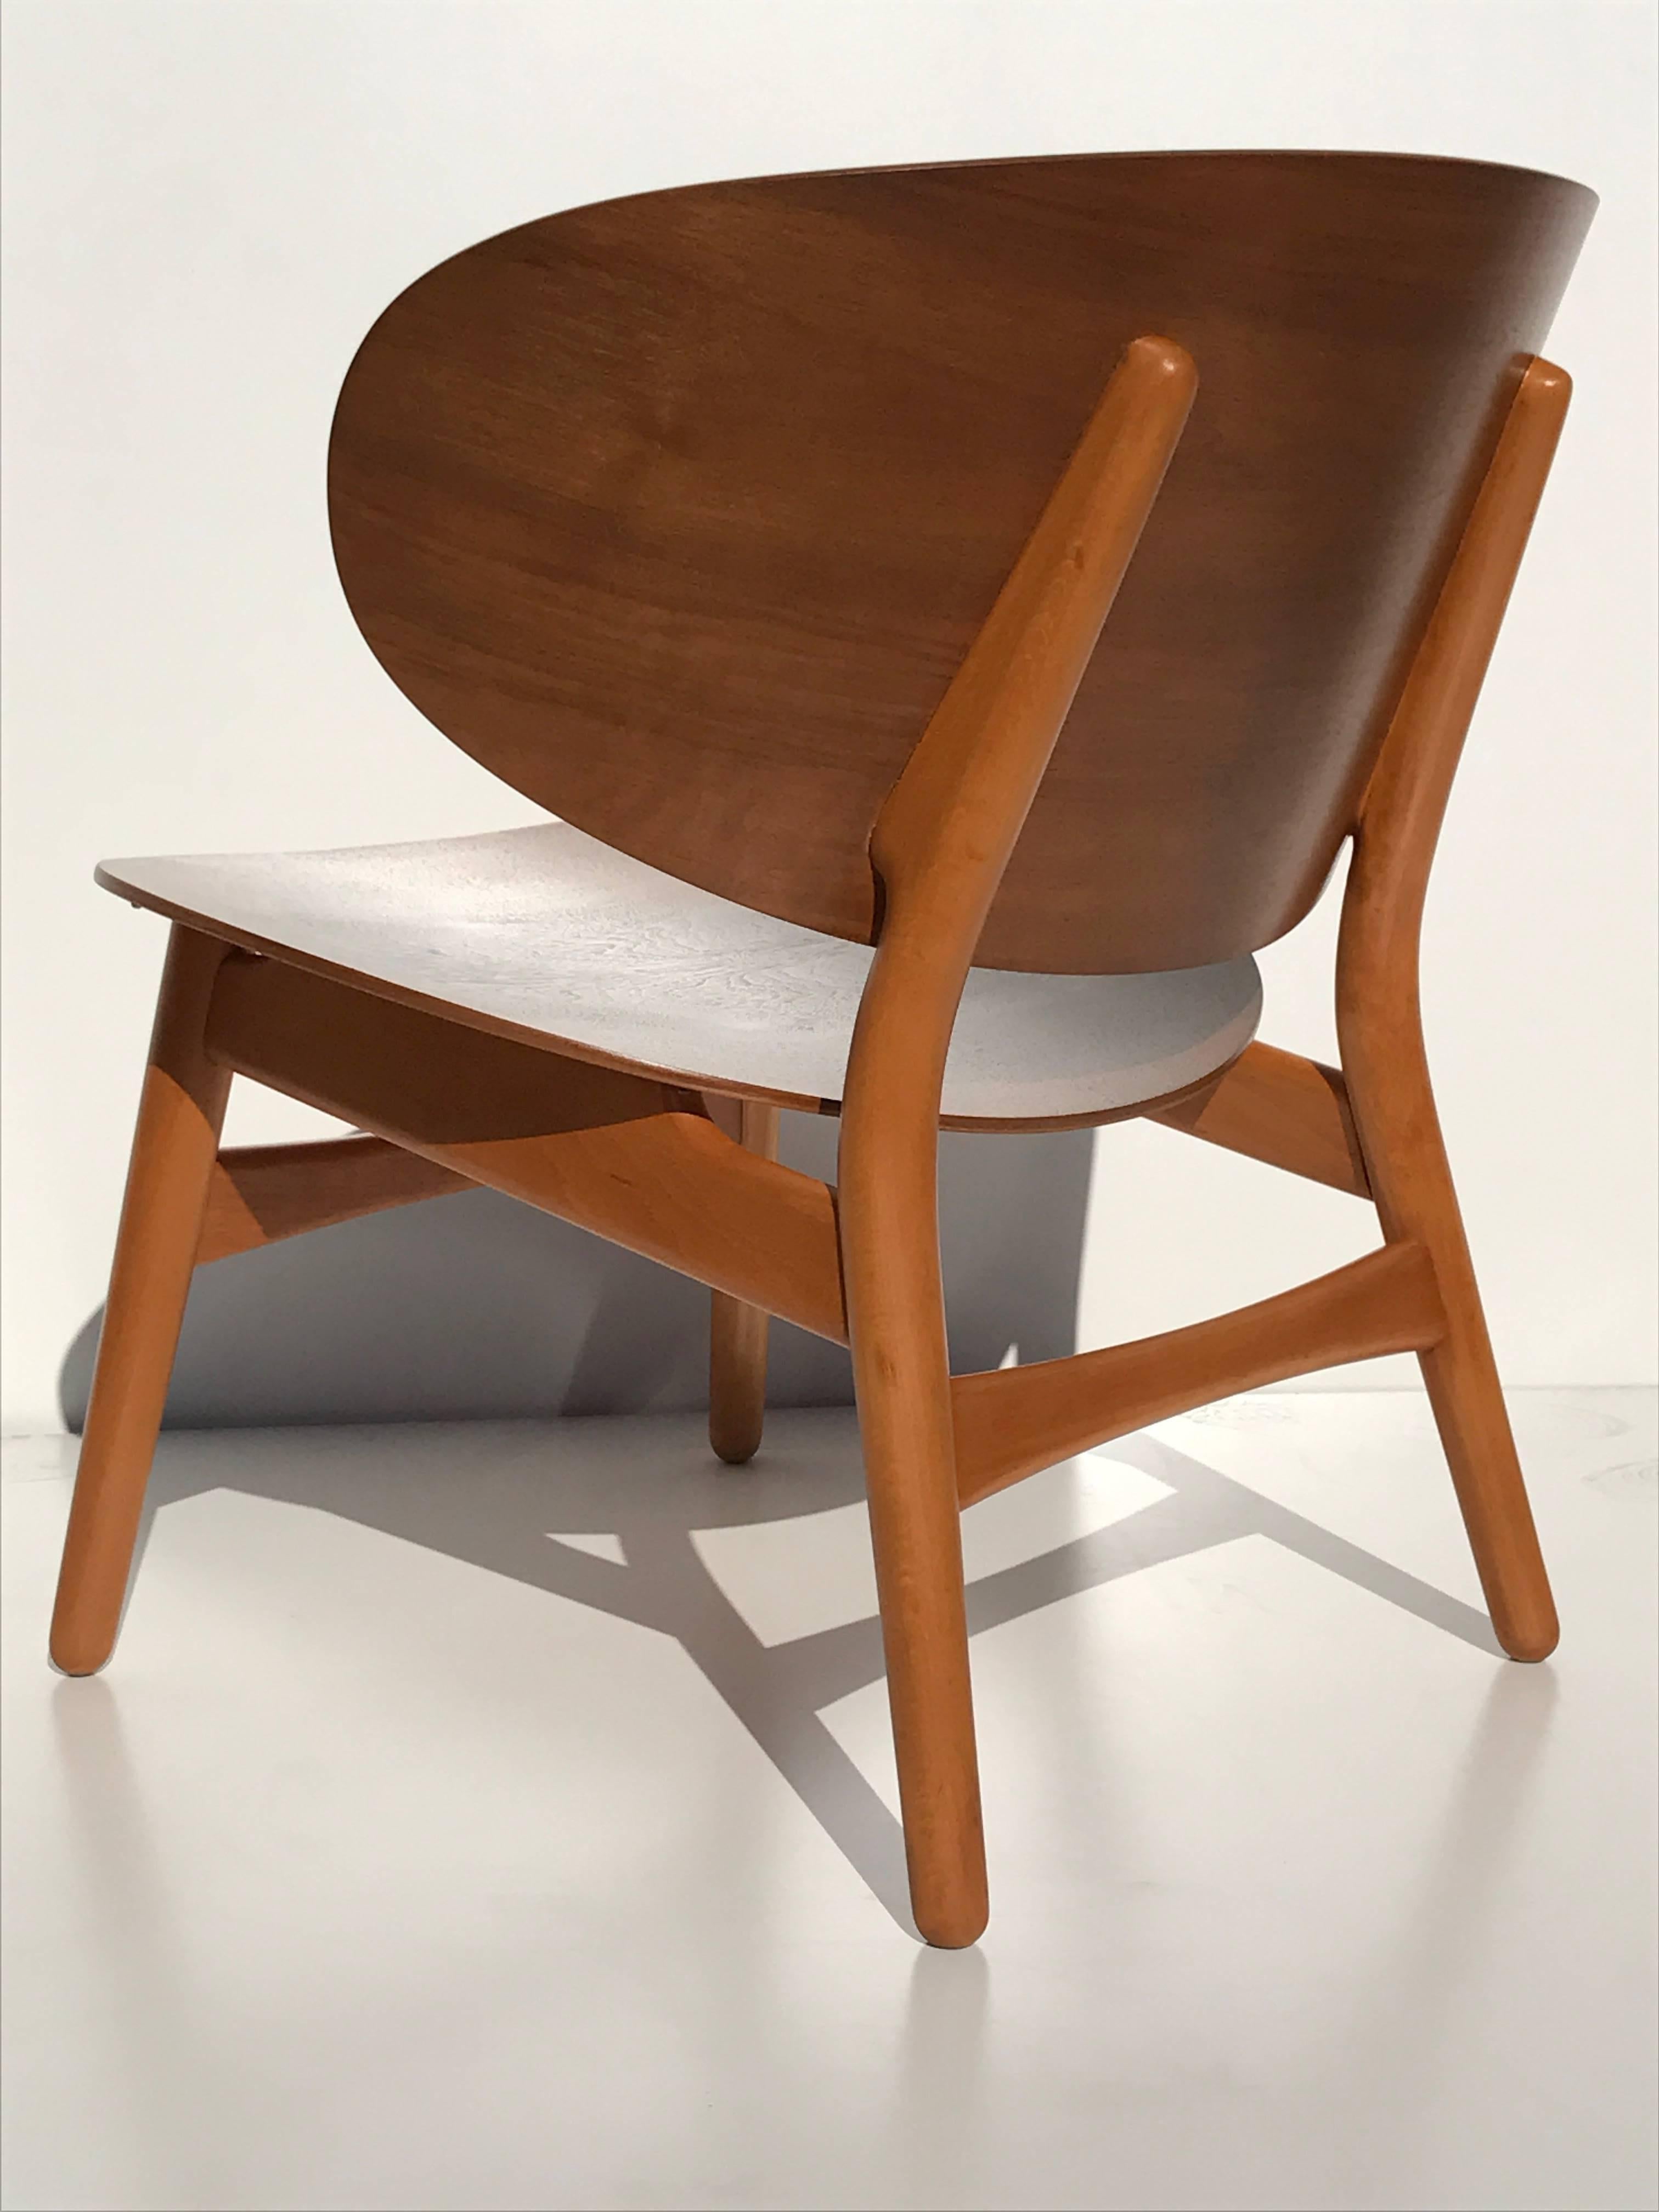 Shell chair by Hans Wegner in laminated walnut seat and back and solid beech wood frame.
It has the original screws on the bottom of seat to secure the seat cushion.